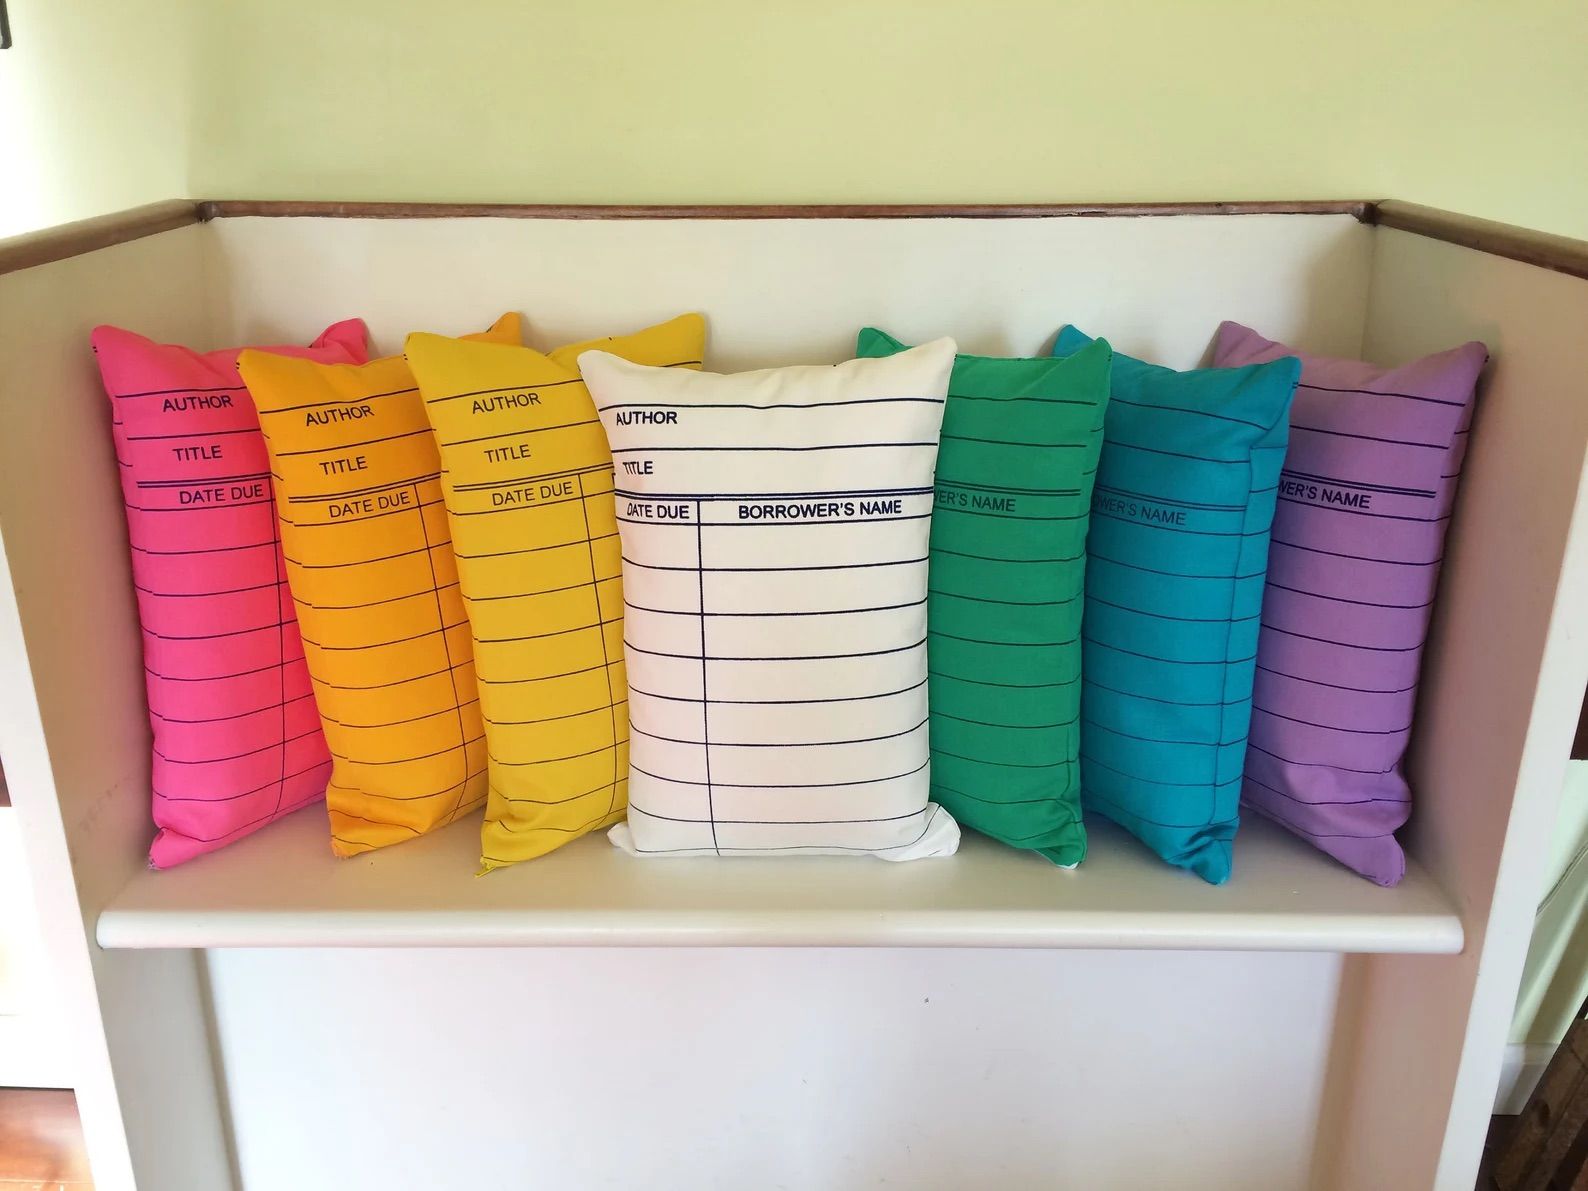 Seven Library Card Pillows in a rainbow of colors are on a white bench.